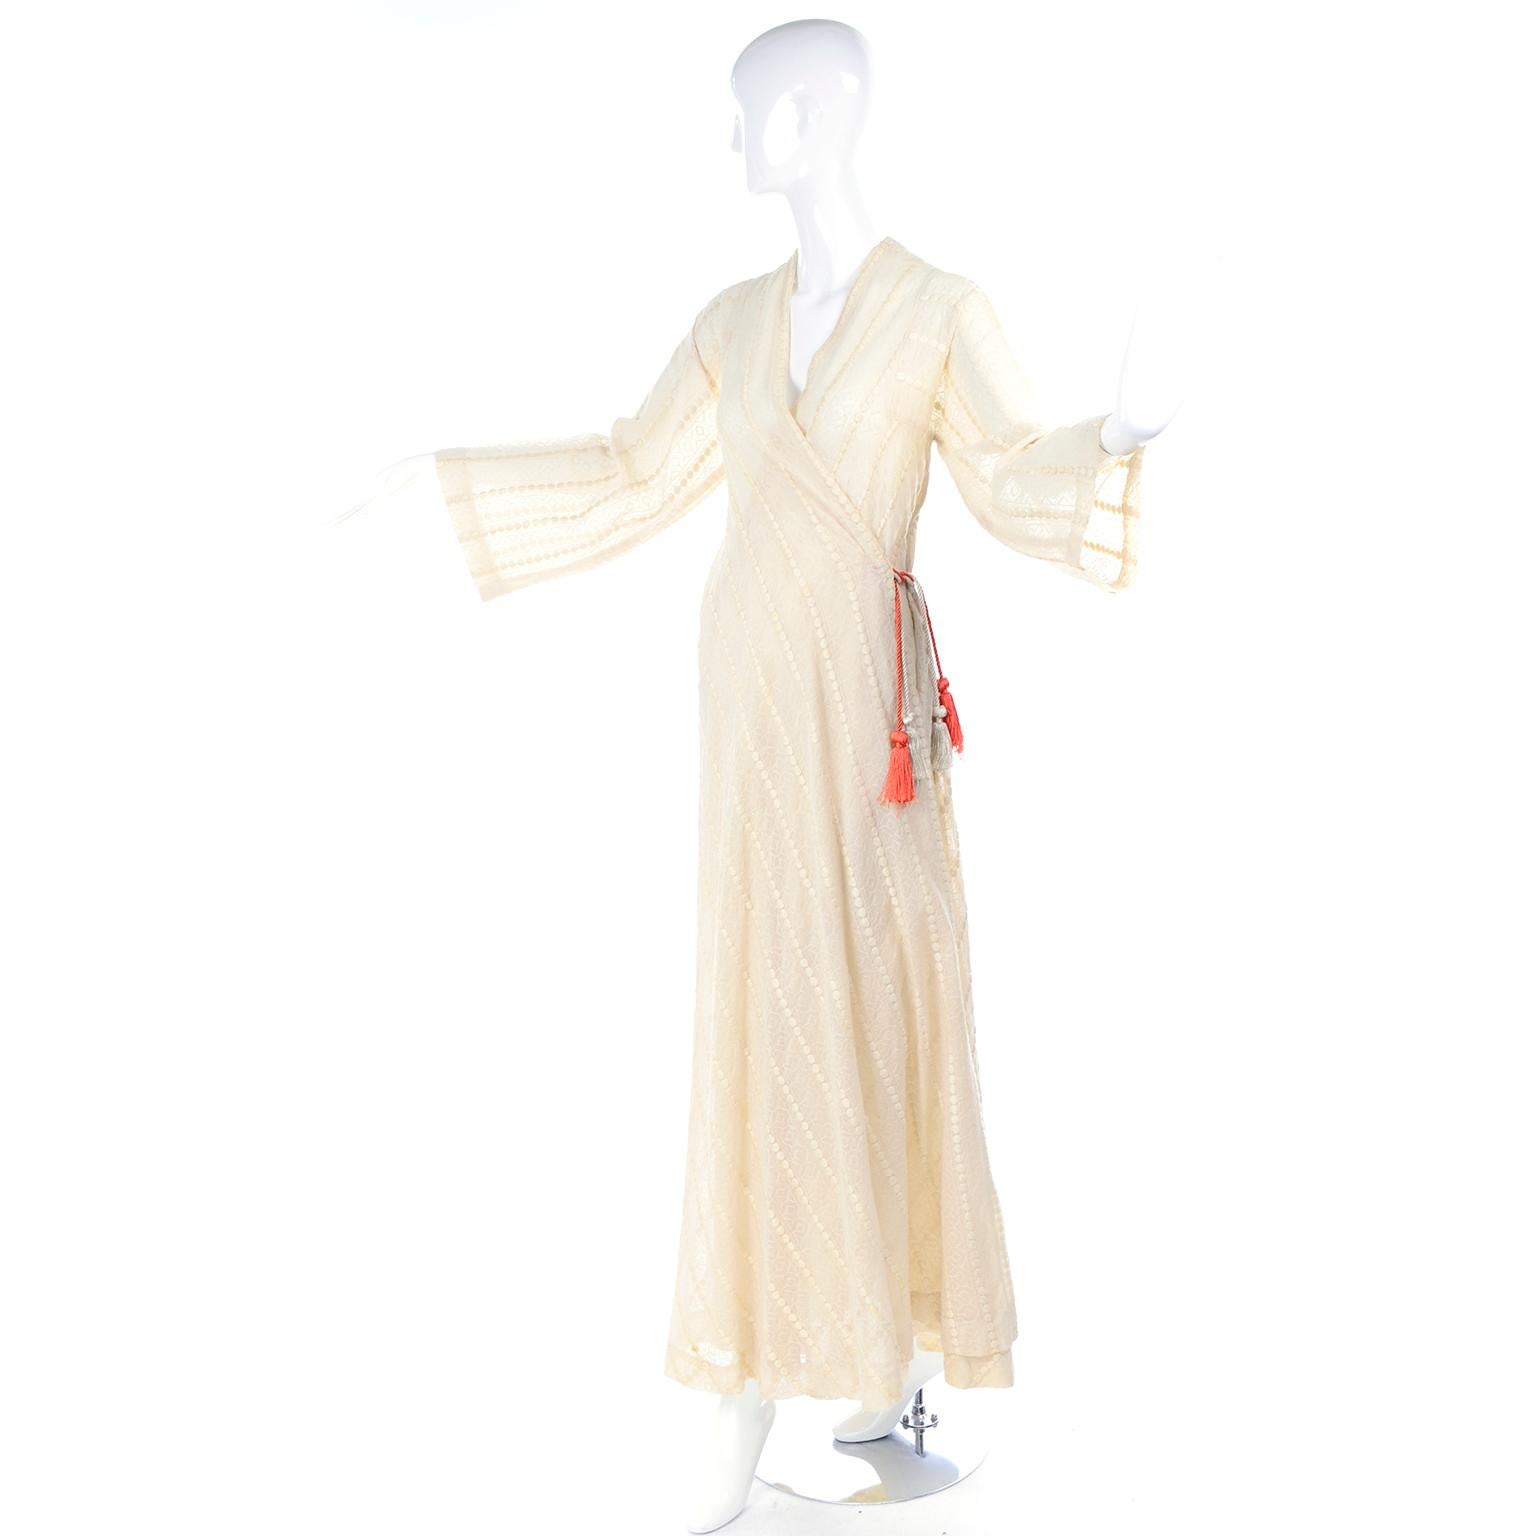 This is a true bohemian style vintage dress from the 1970's in a cream embroidered cotton voile fabric with raised dots.  The dress looks like a hostess gown, but is worn as a day or evening dress and closes with orange and cream tassel ties. Sheer